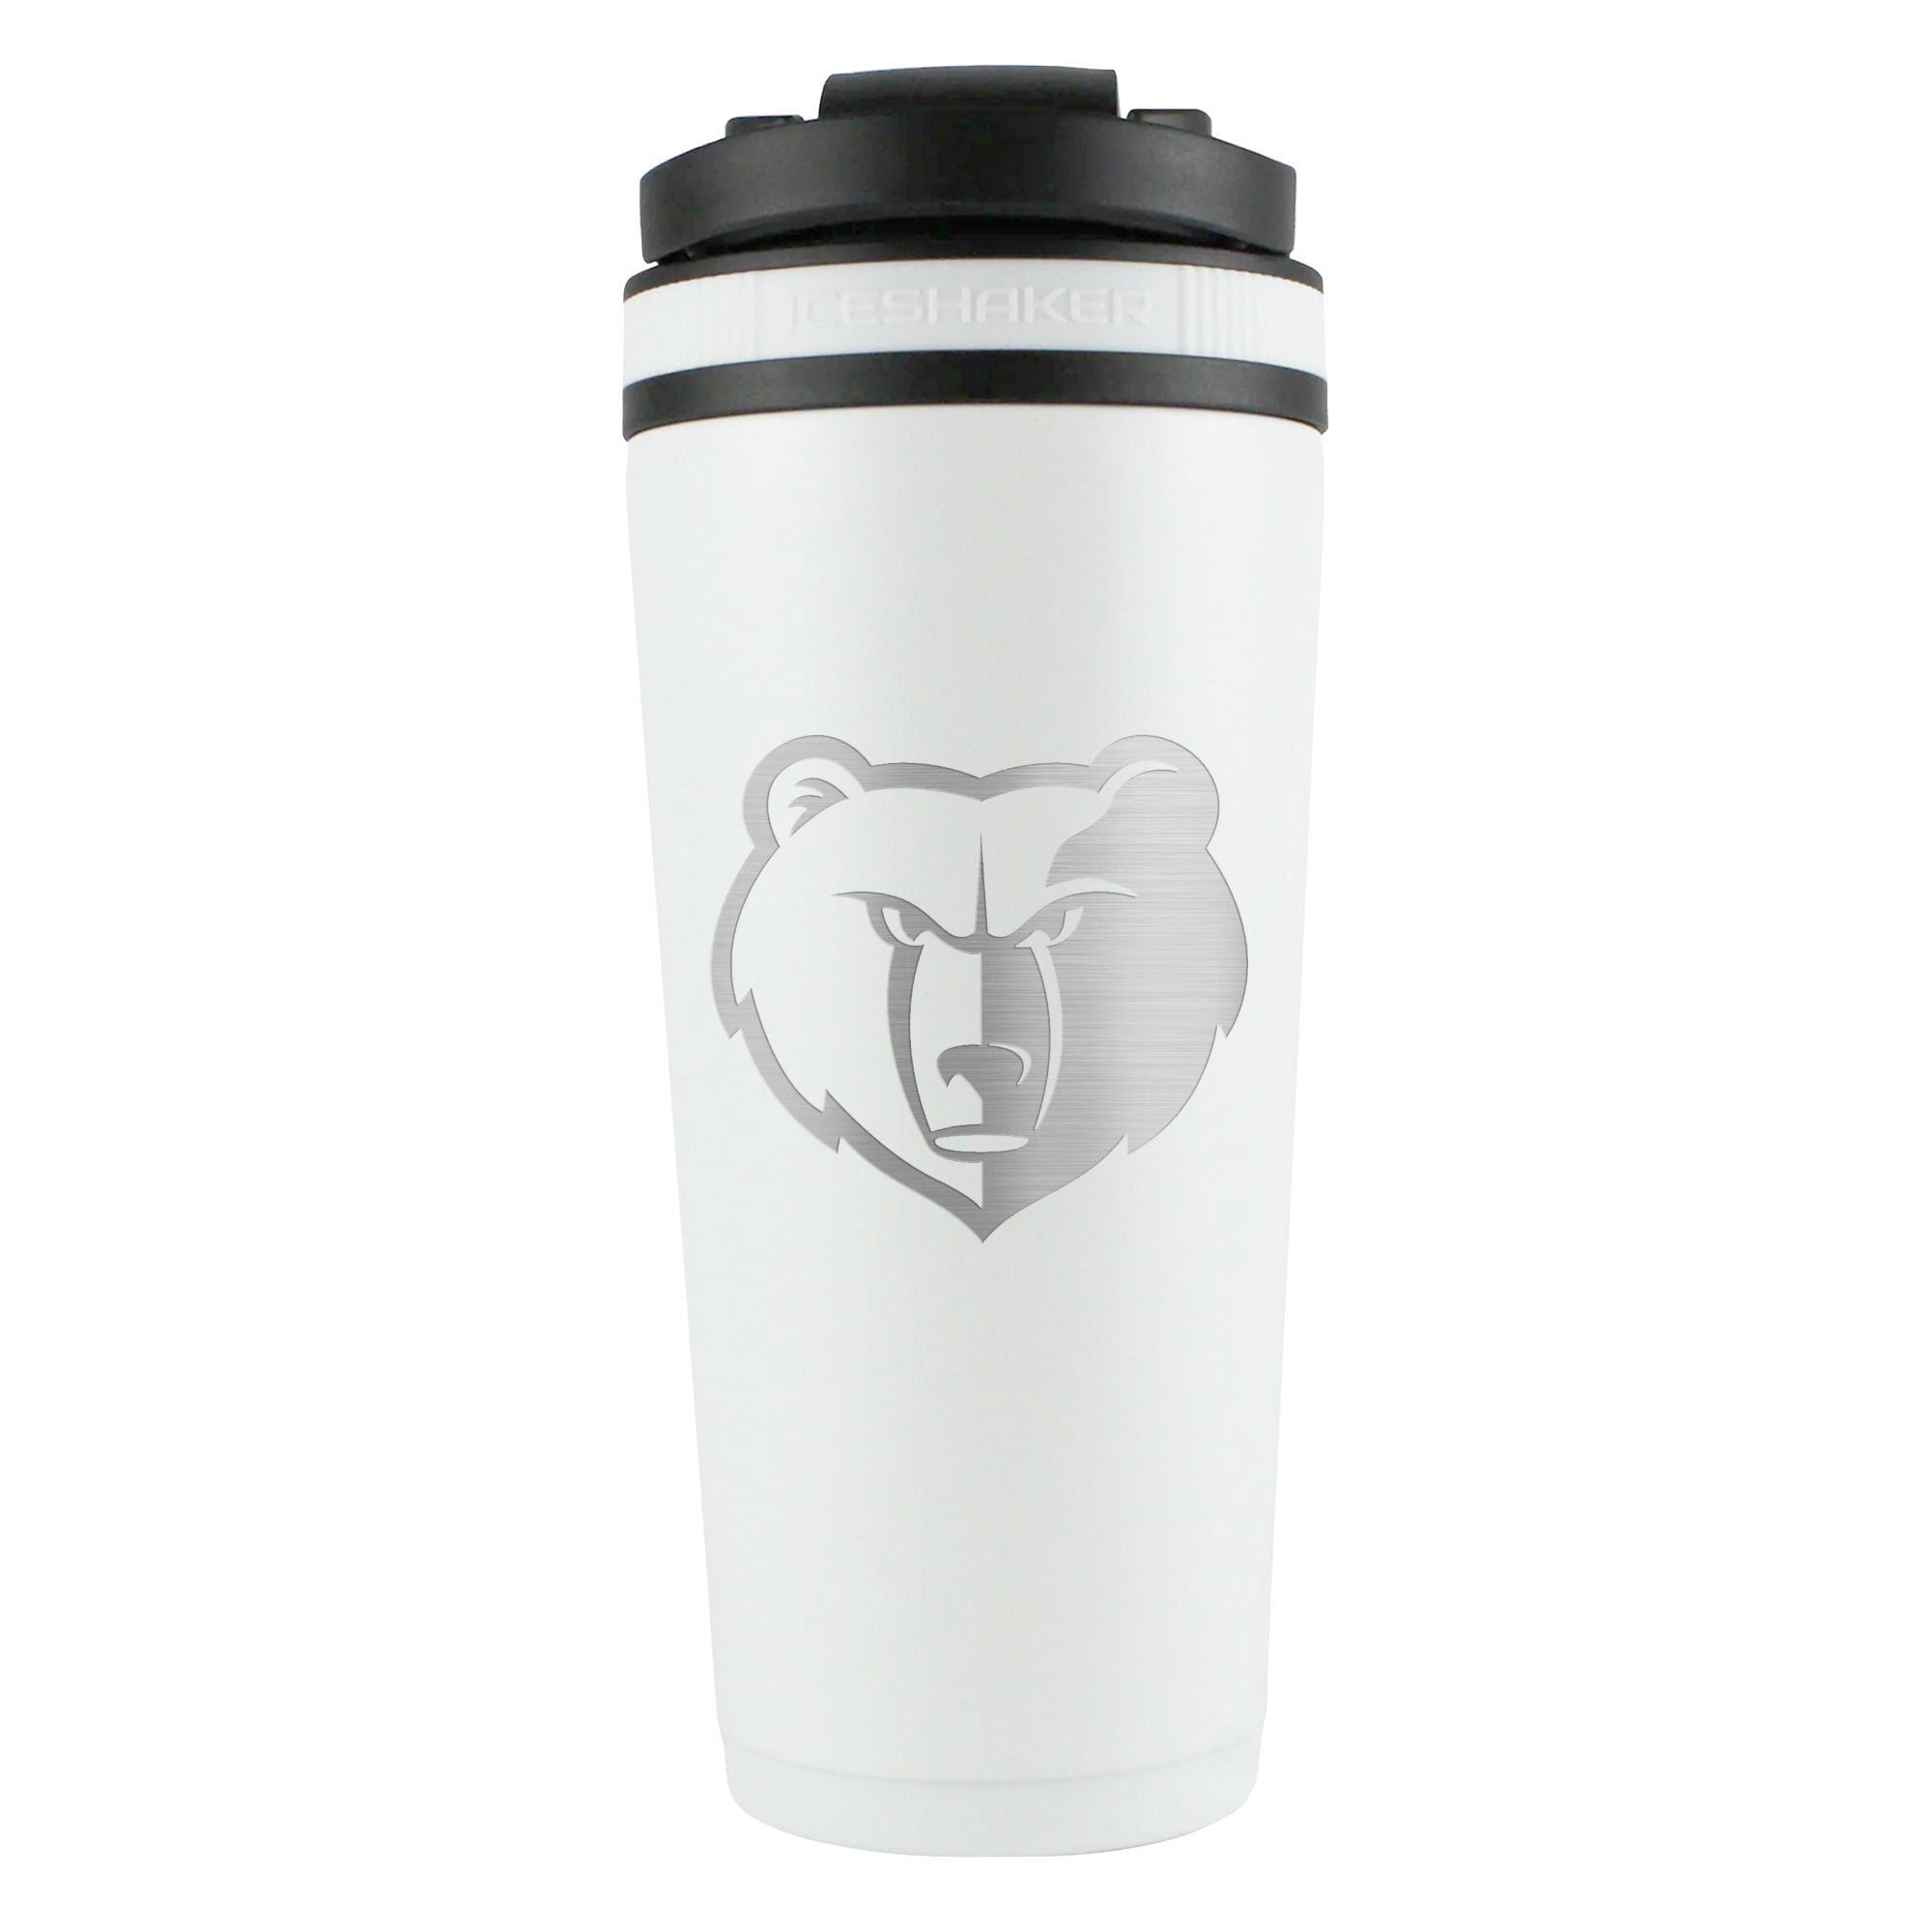 Officially Licensed Memphis Grizzlies 26oz Ice Shaker